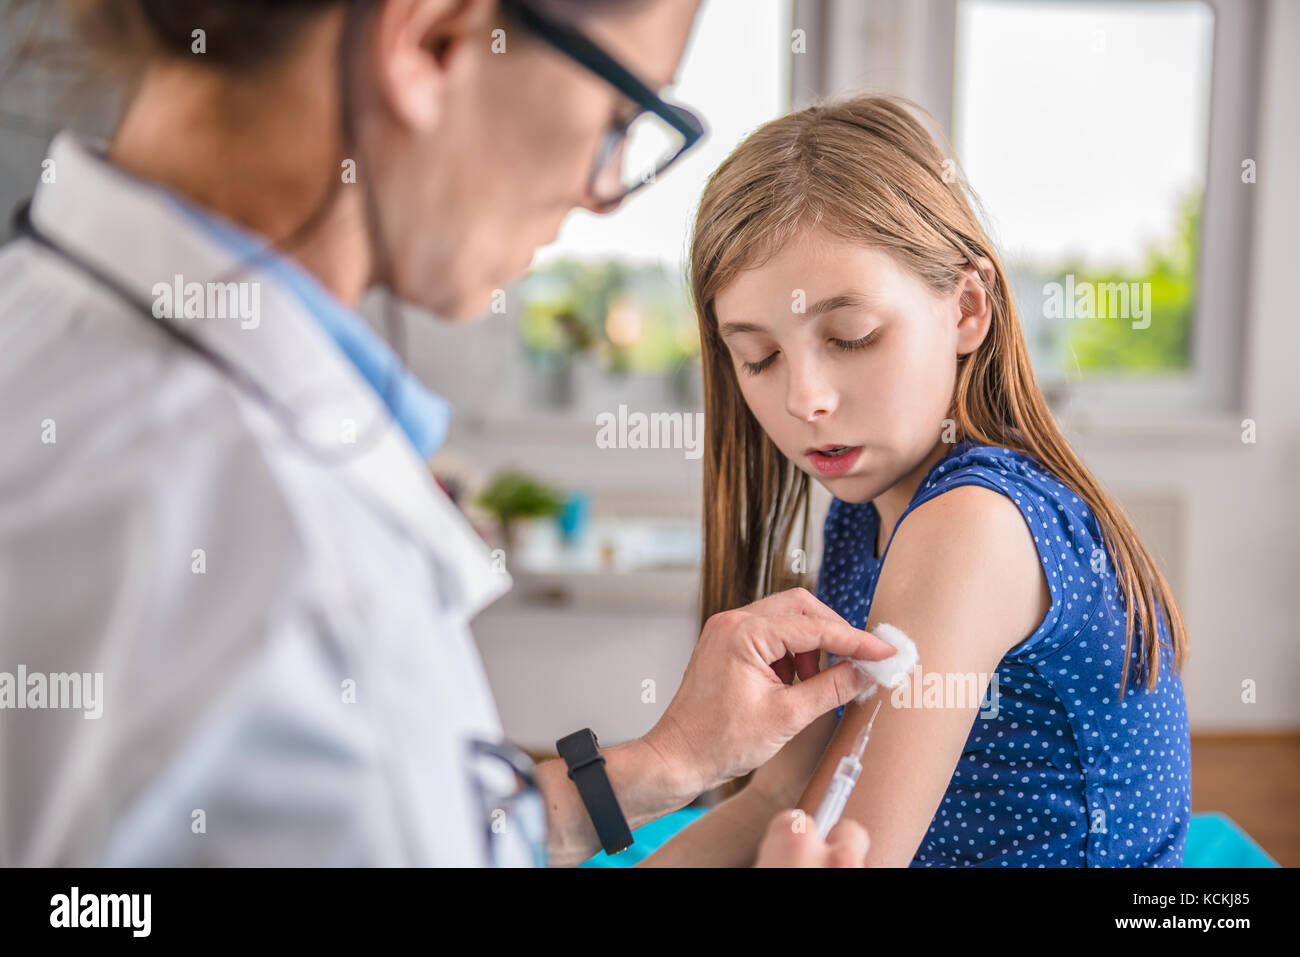 Pediatrics female doctor giving a young girl a vaccine shot in the arm Stock Photo